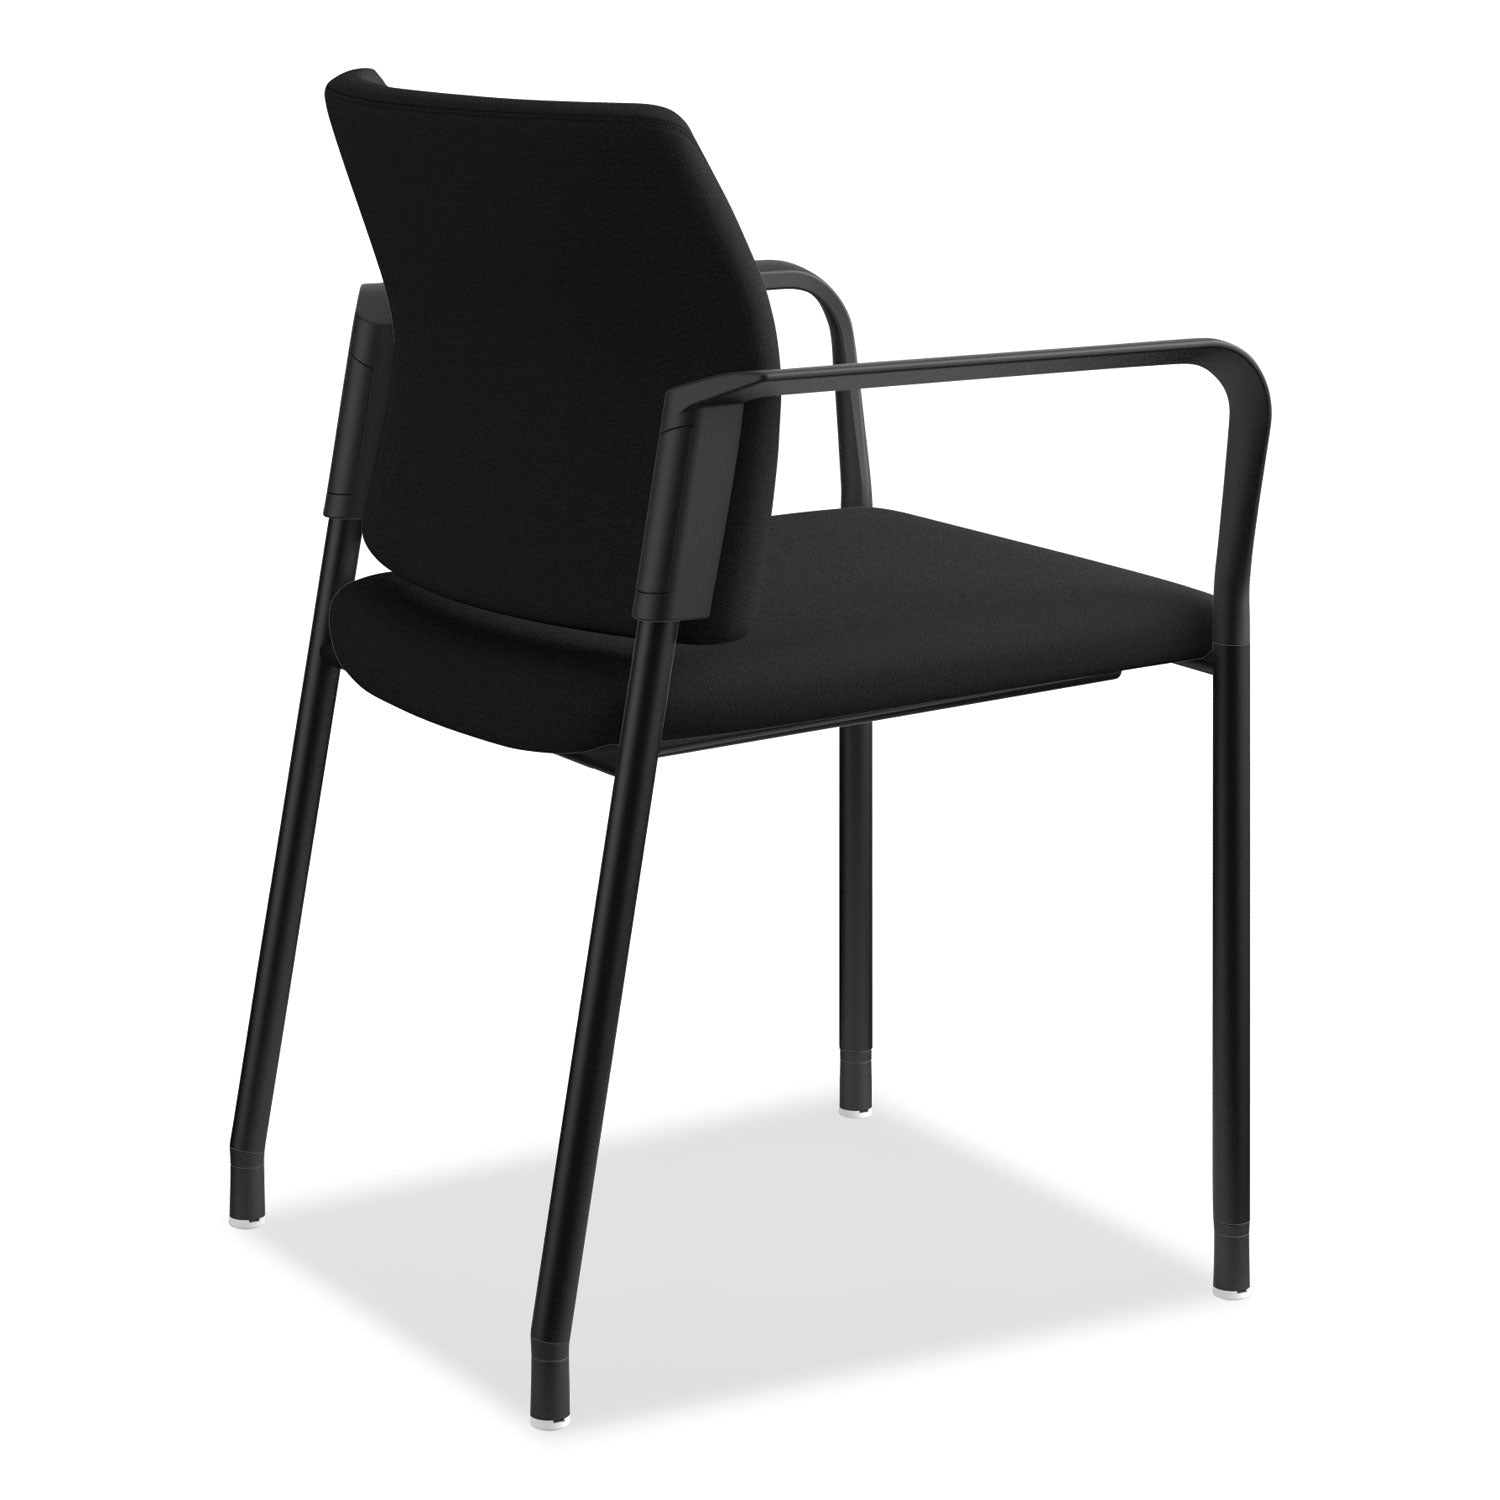 accommodate-series-guest-chair-with-arms-fabric-upholstery-2325-x-2225-x-32-black-seat-back-charblack-legs-2-carton_honsgs6fbc10c - 5